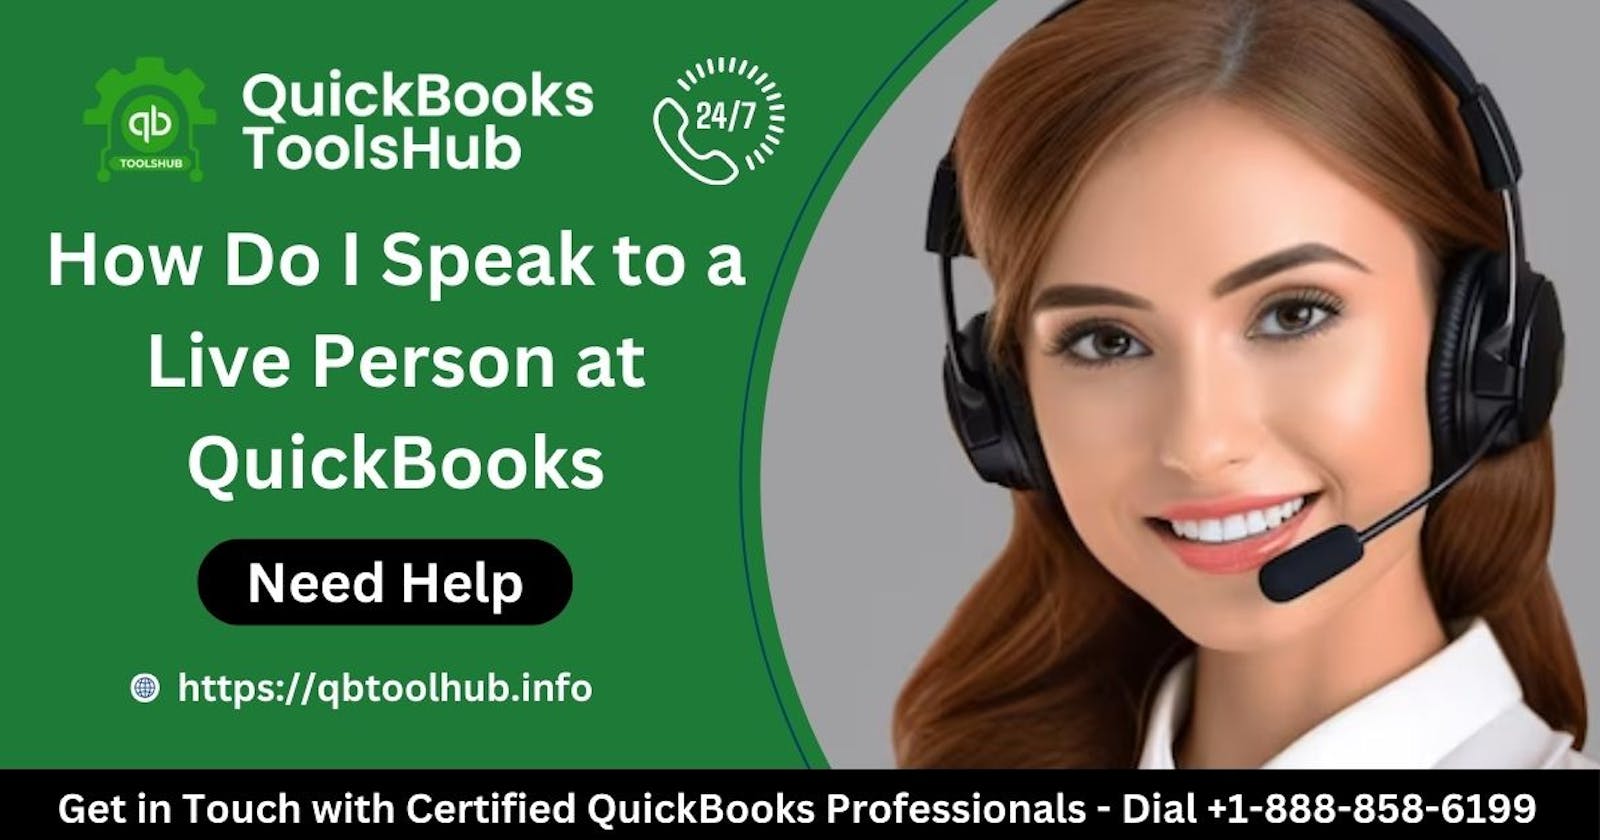 How to Contact +1–888–858–6199 QuickBooks Error Support Phone Number